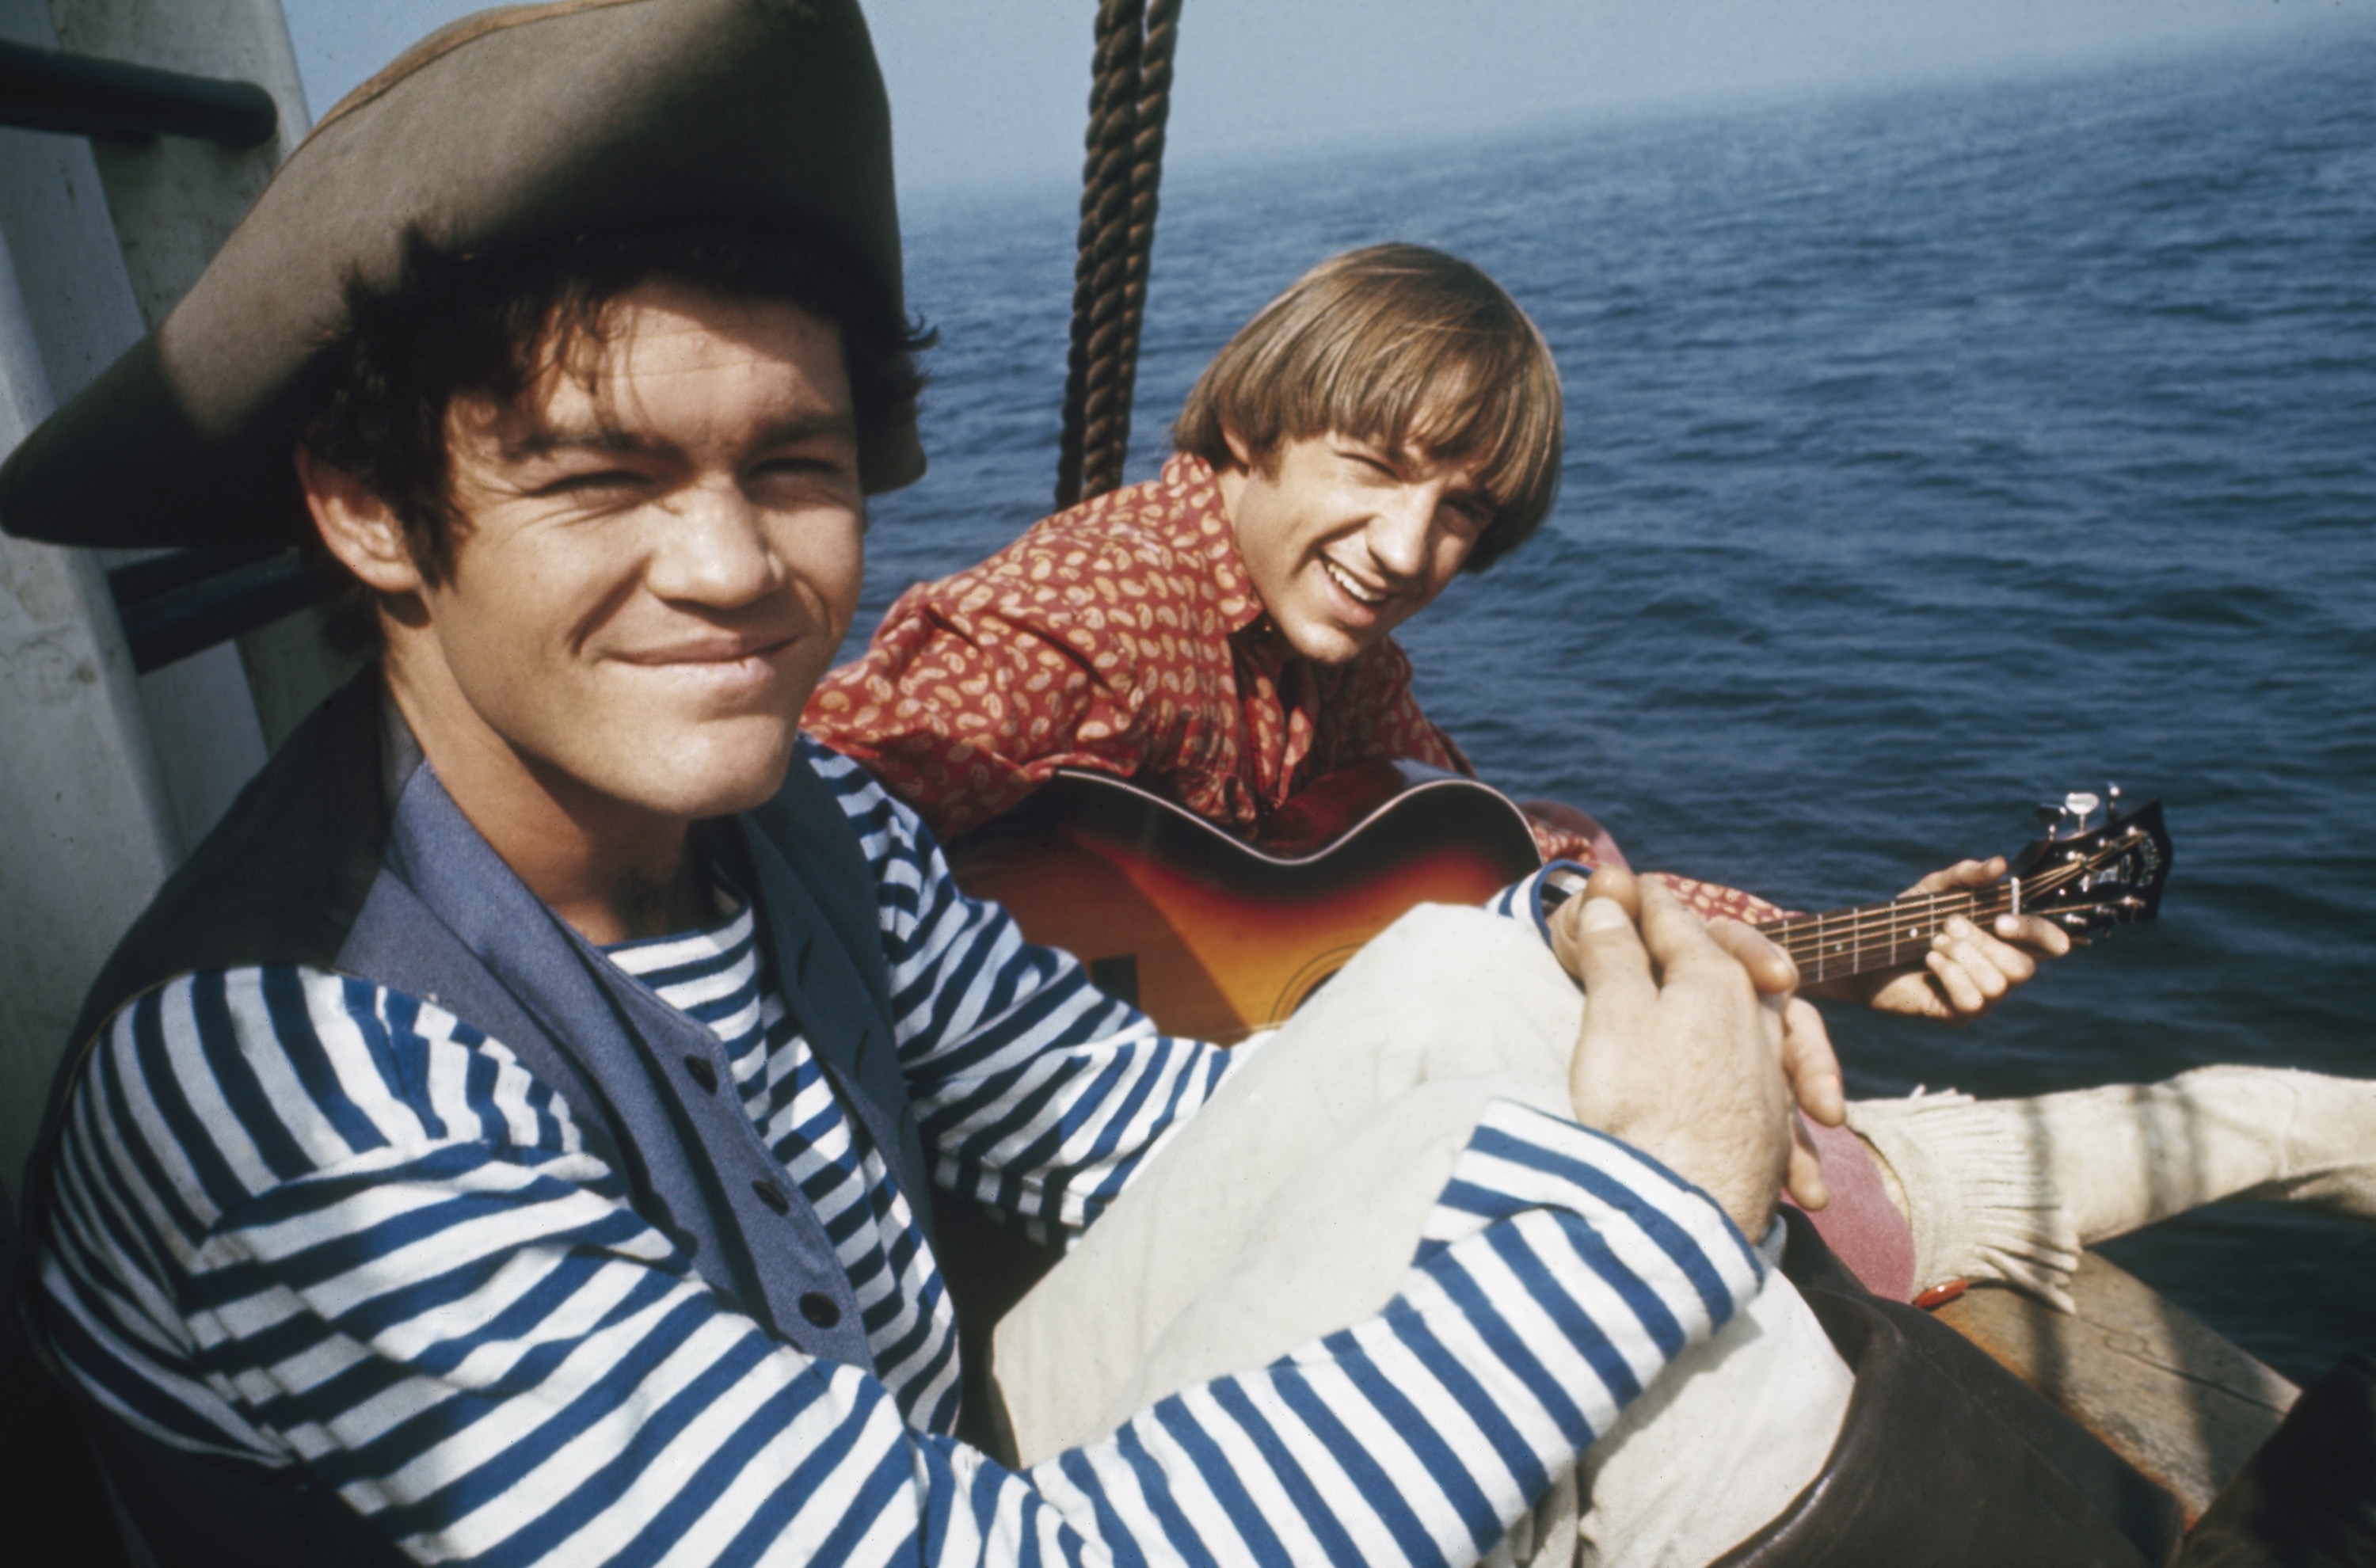 The Monkees’ Micky Dolenz and Peter Tork near the water